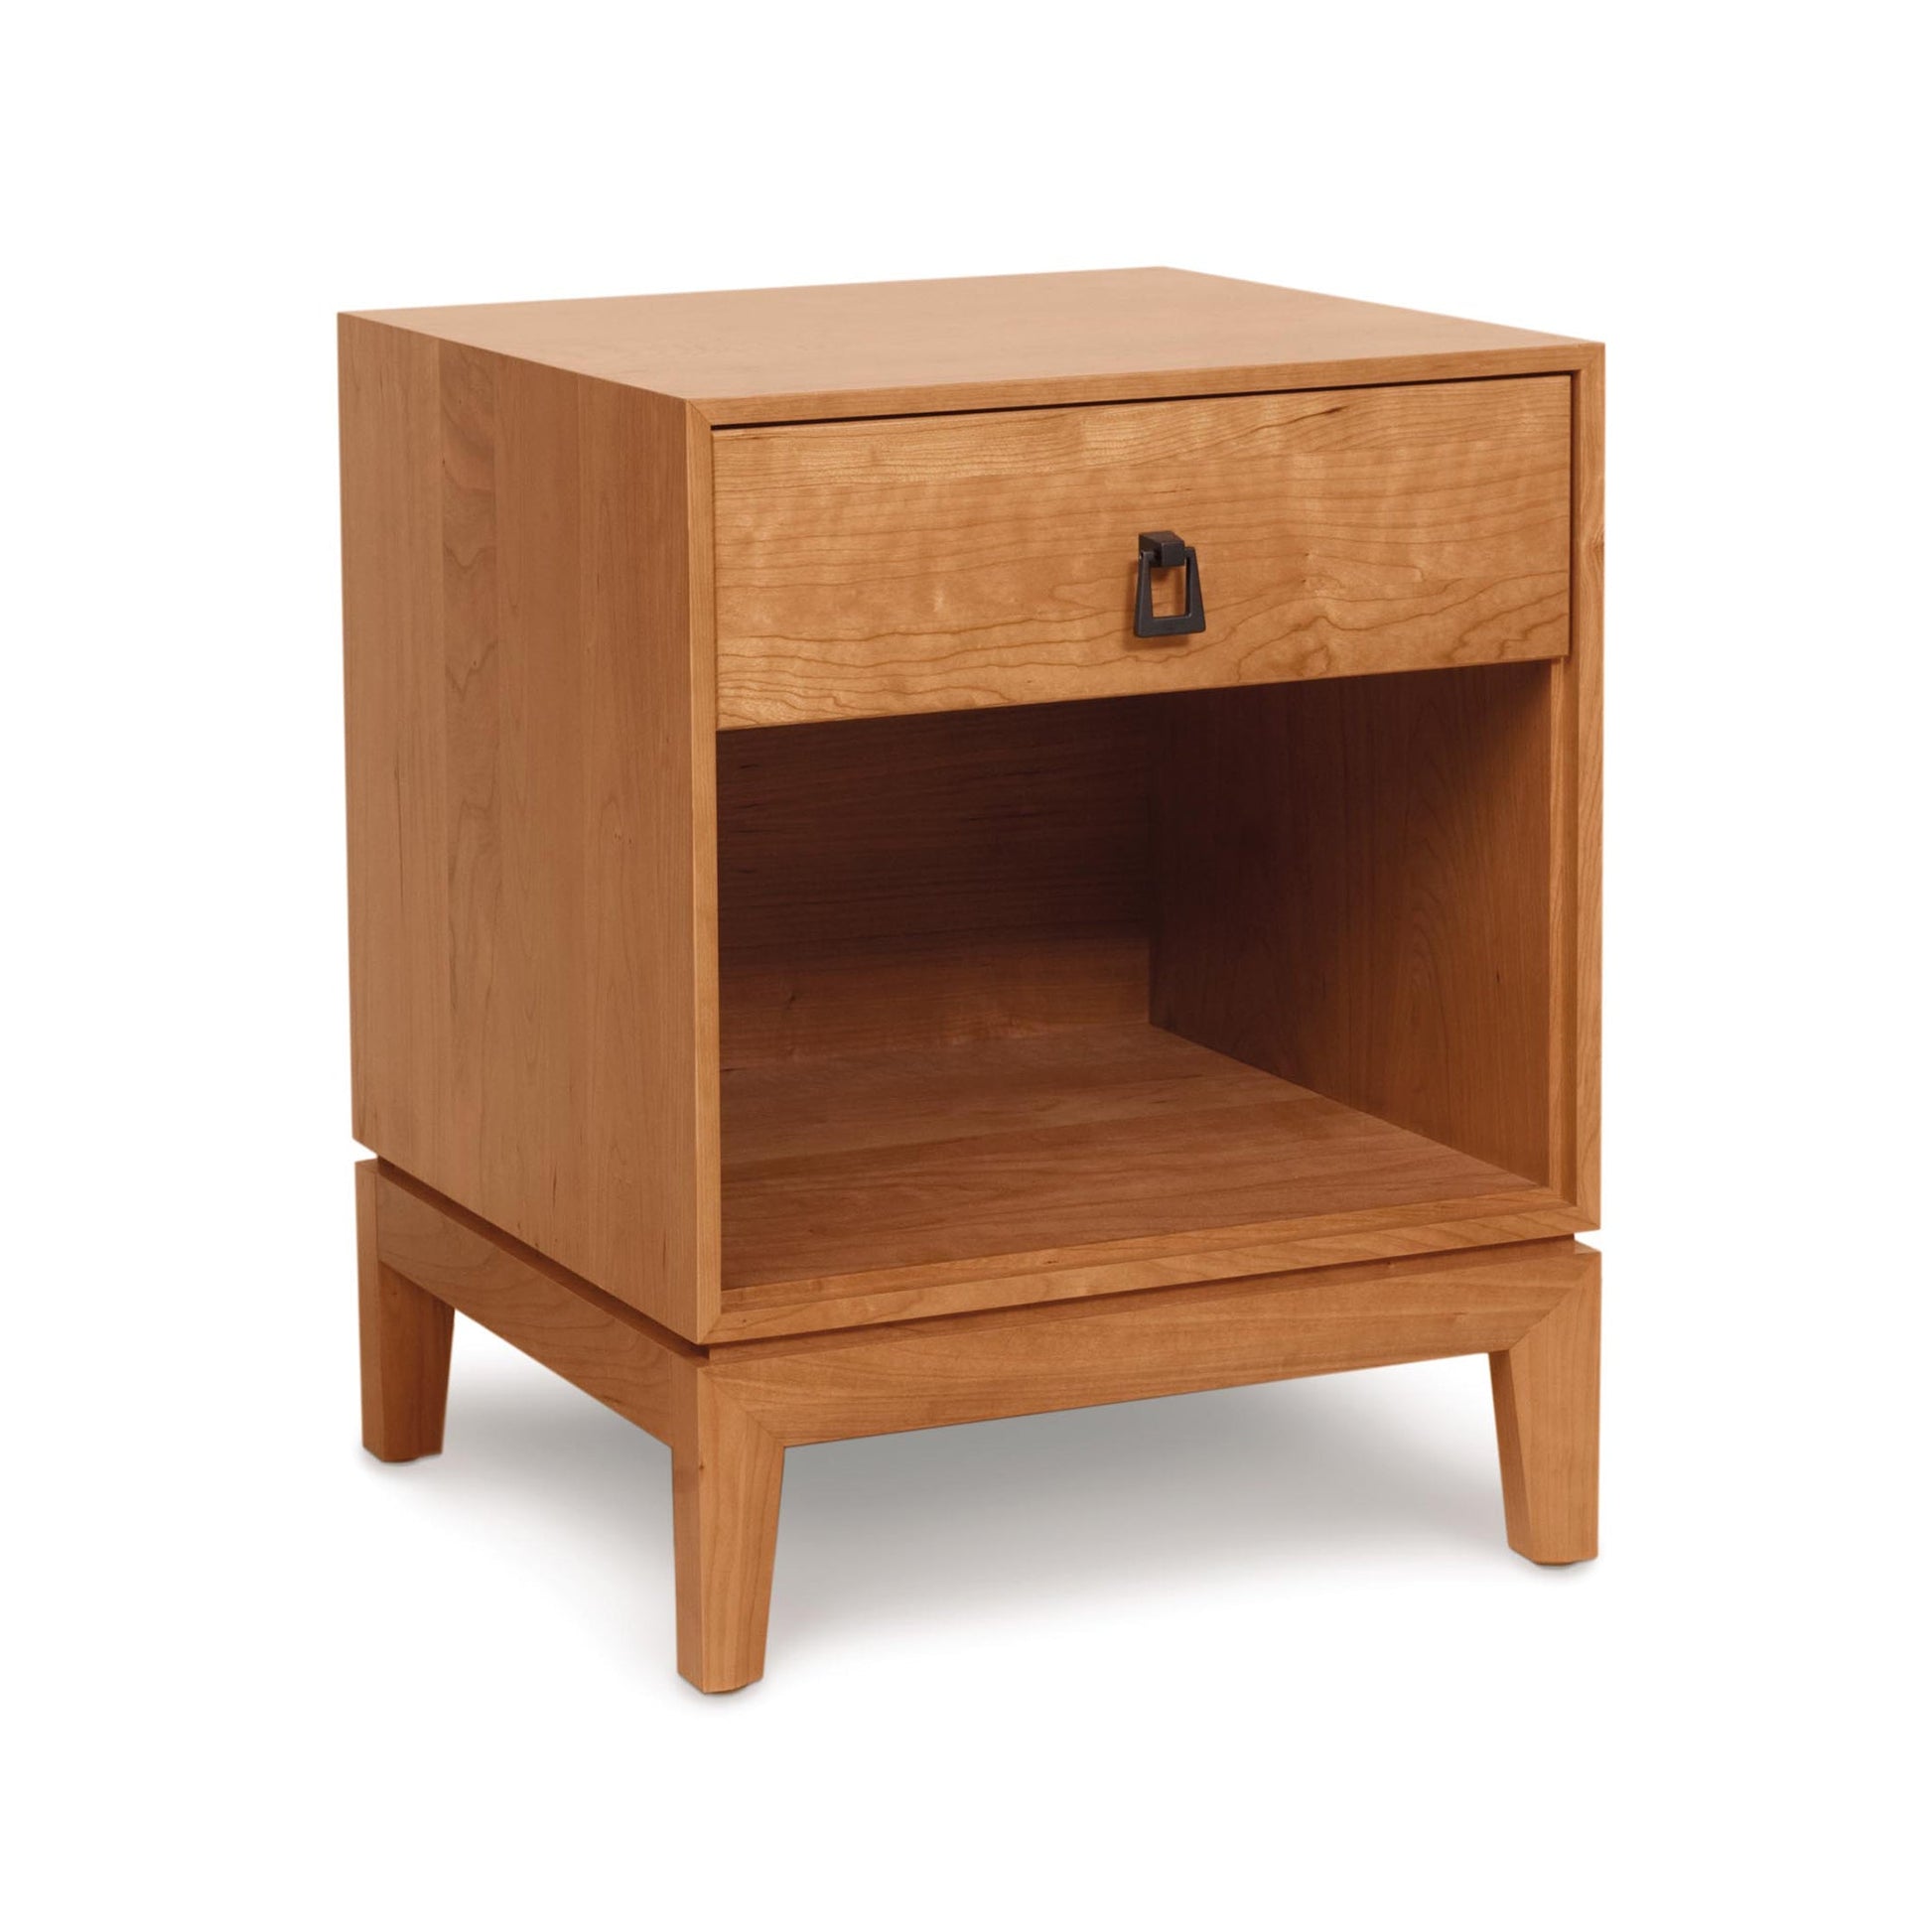 A small wooden nightstand with a drawer.